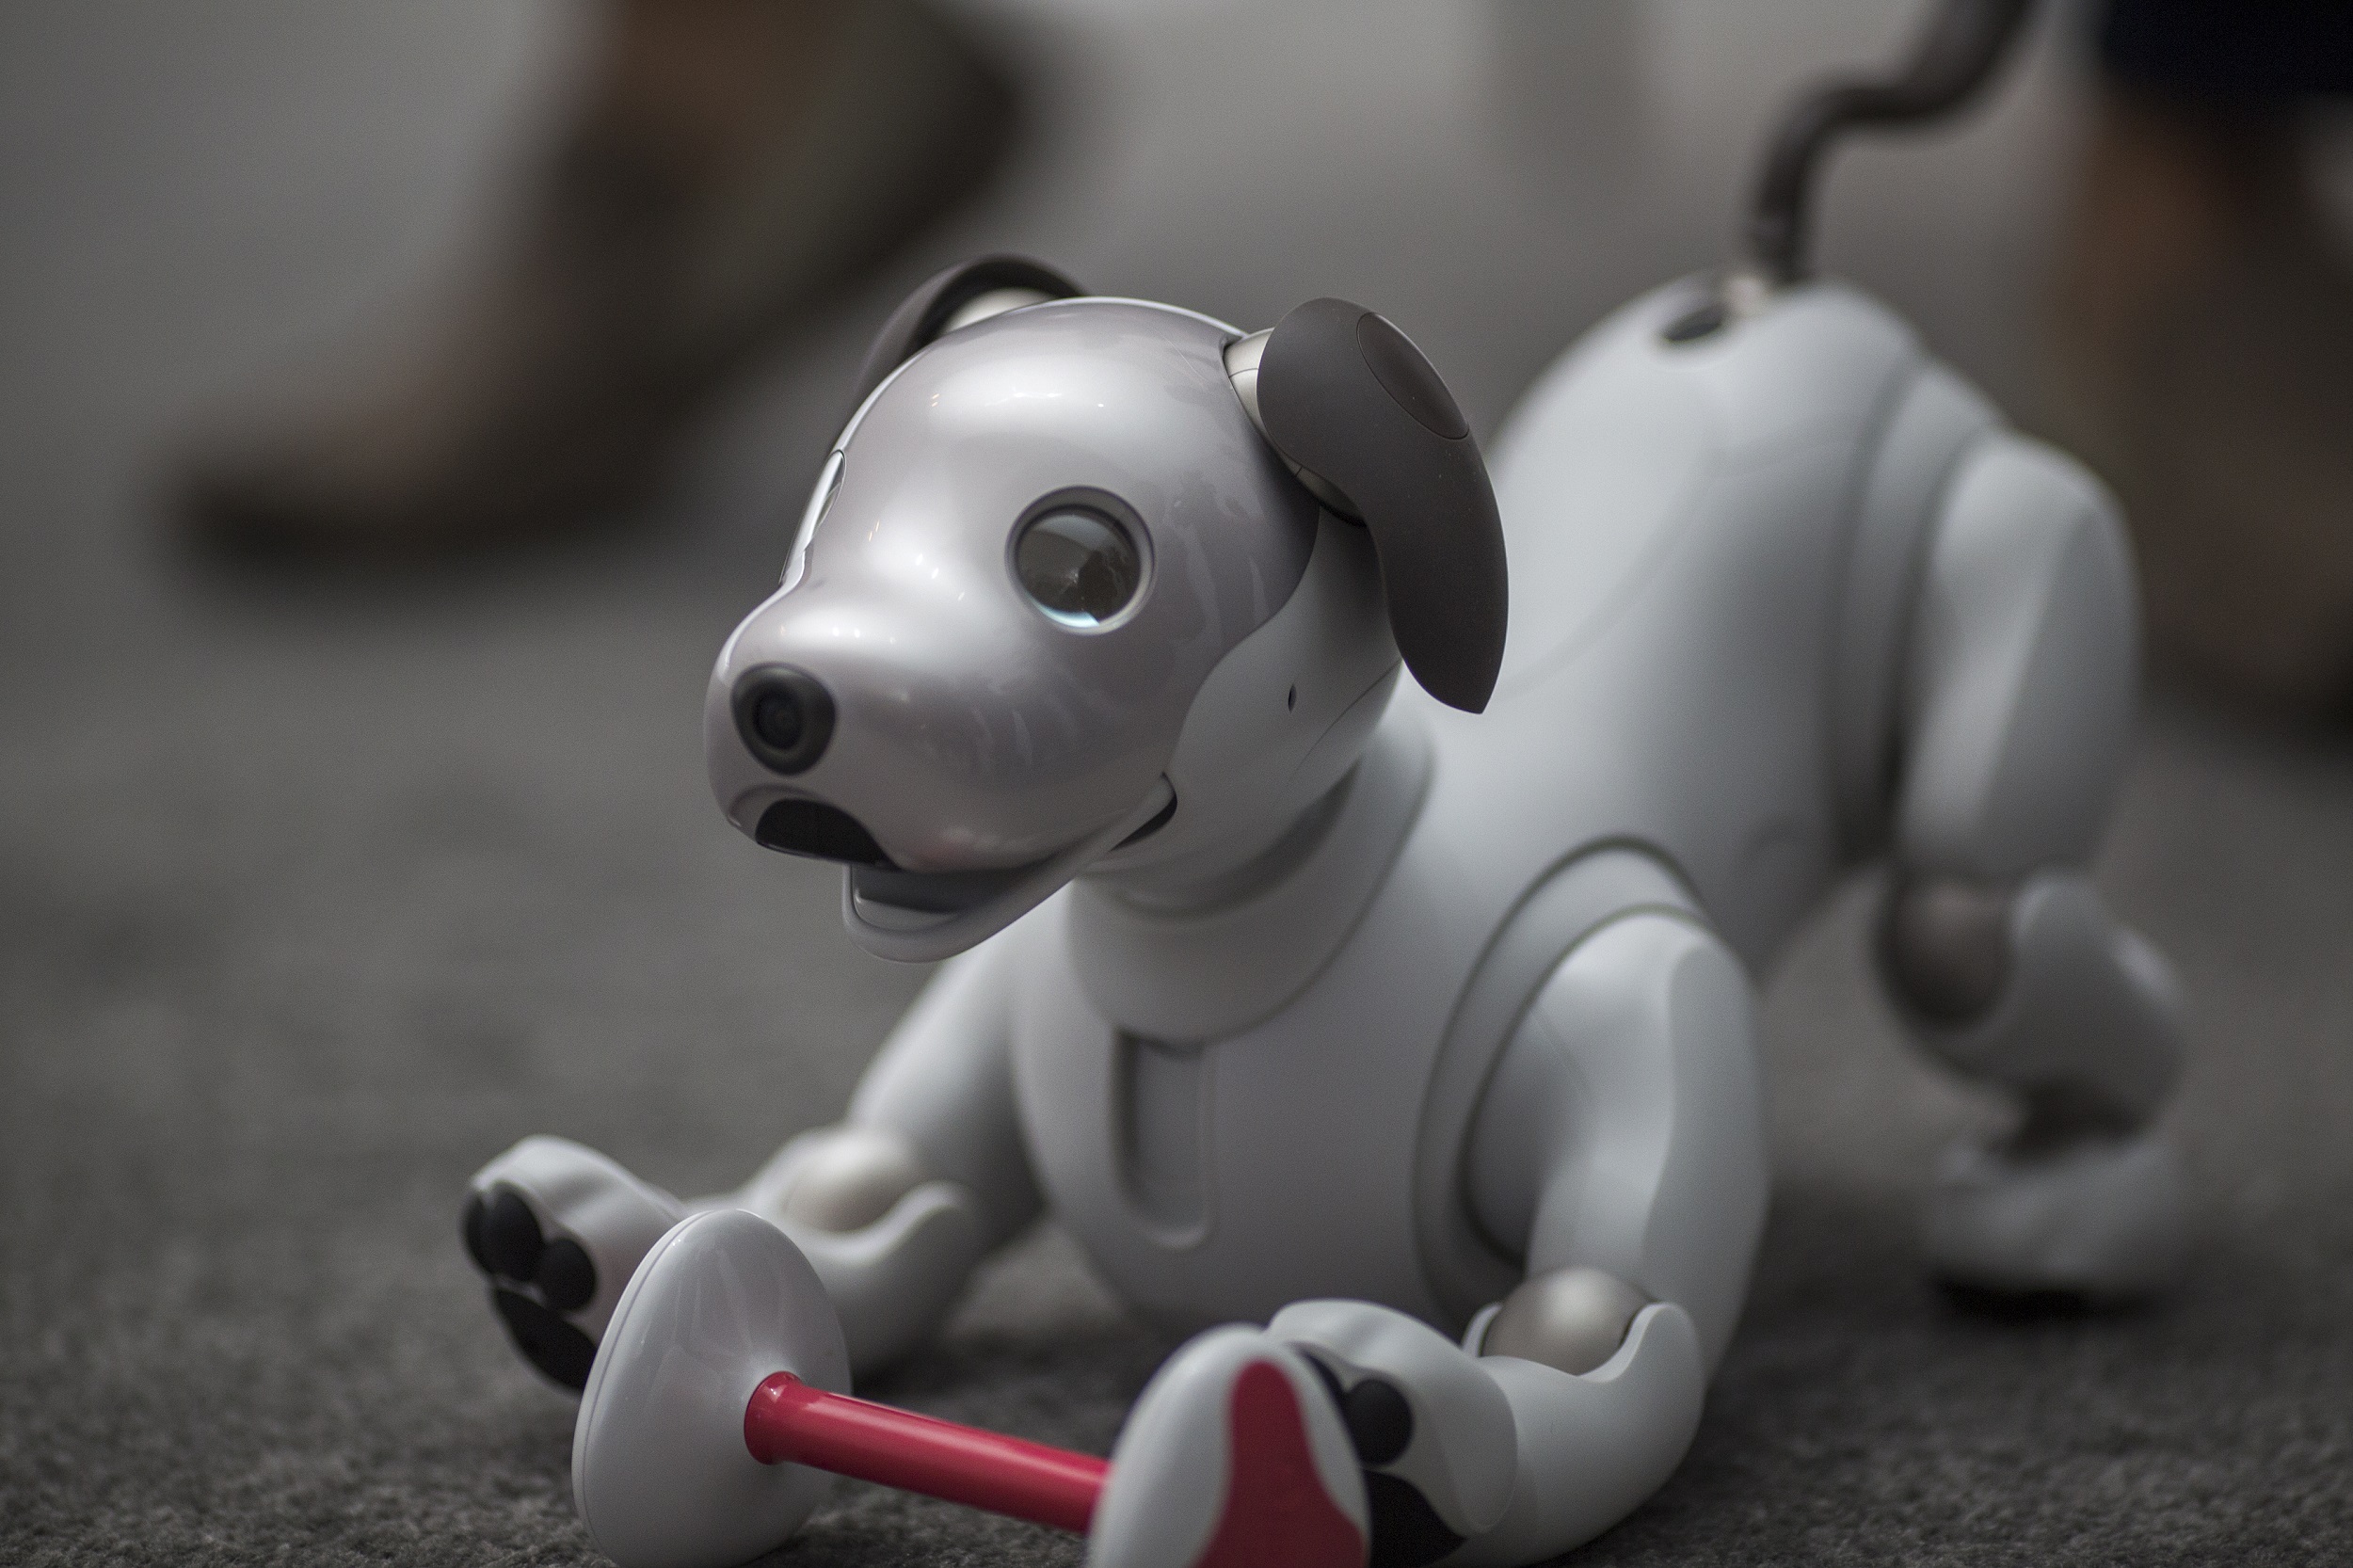 Sony Is About To Release Its Robot Dog, Aibo, in the US